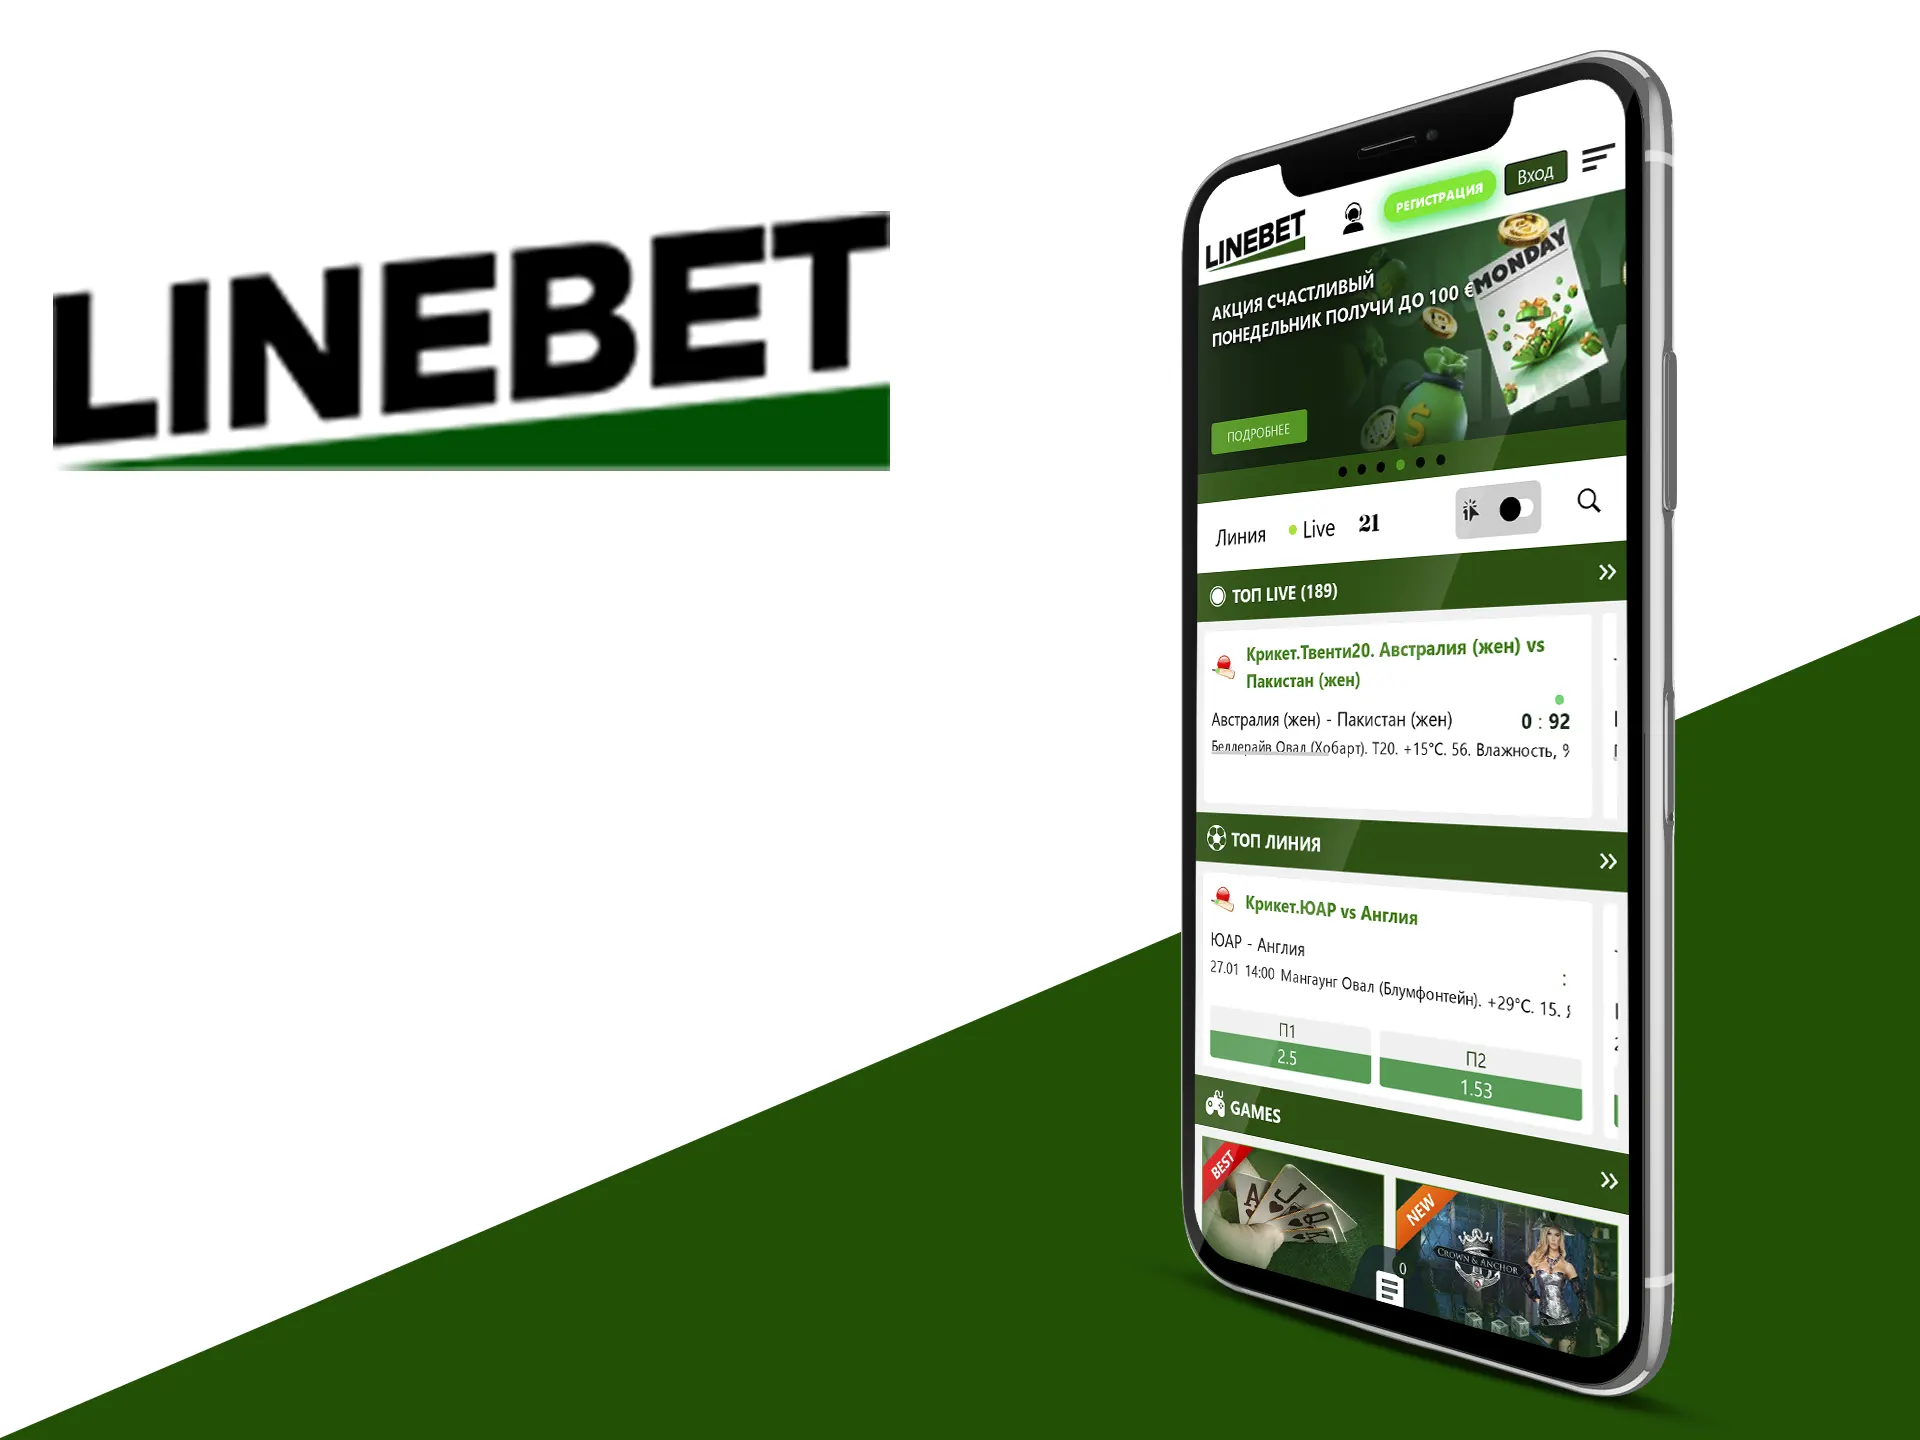 If you like to bet from your smartphone then the Linebet app is ideal, with only the full functionality similar to the full version.